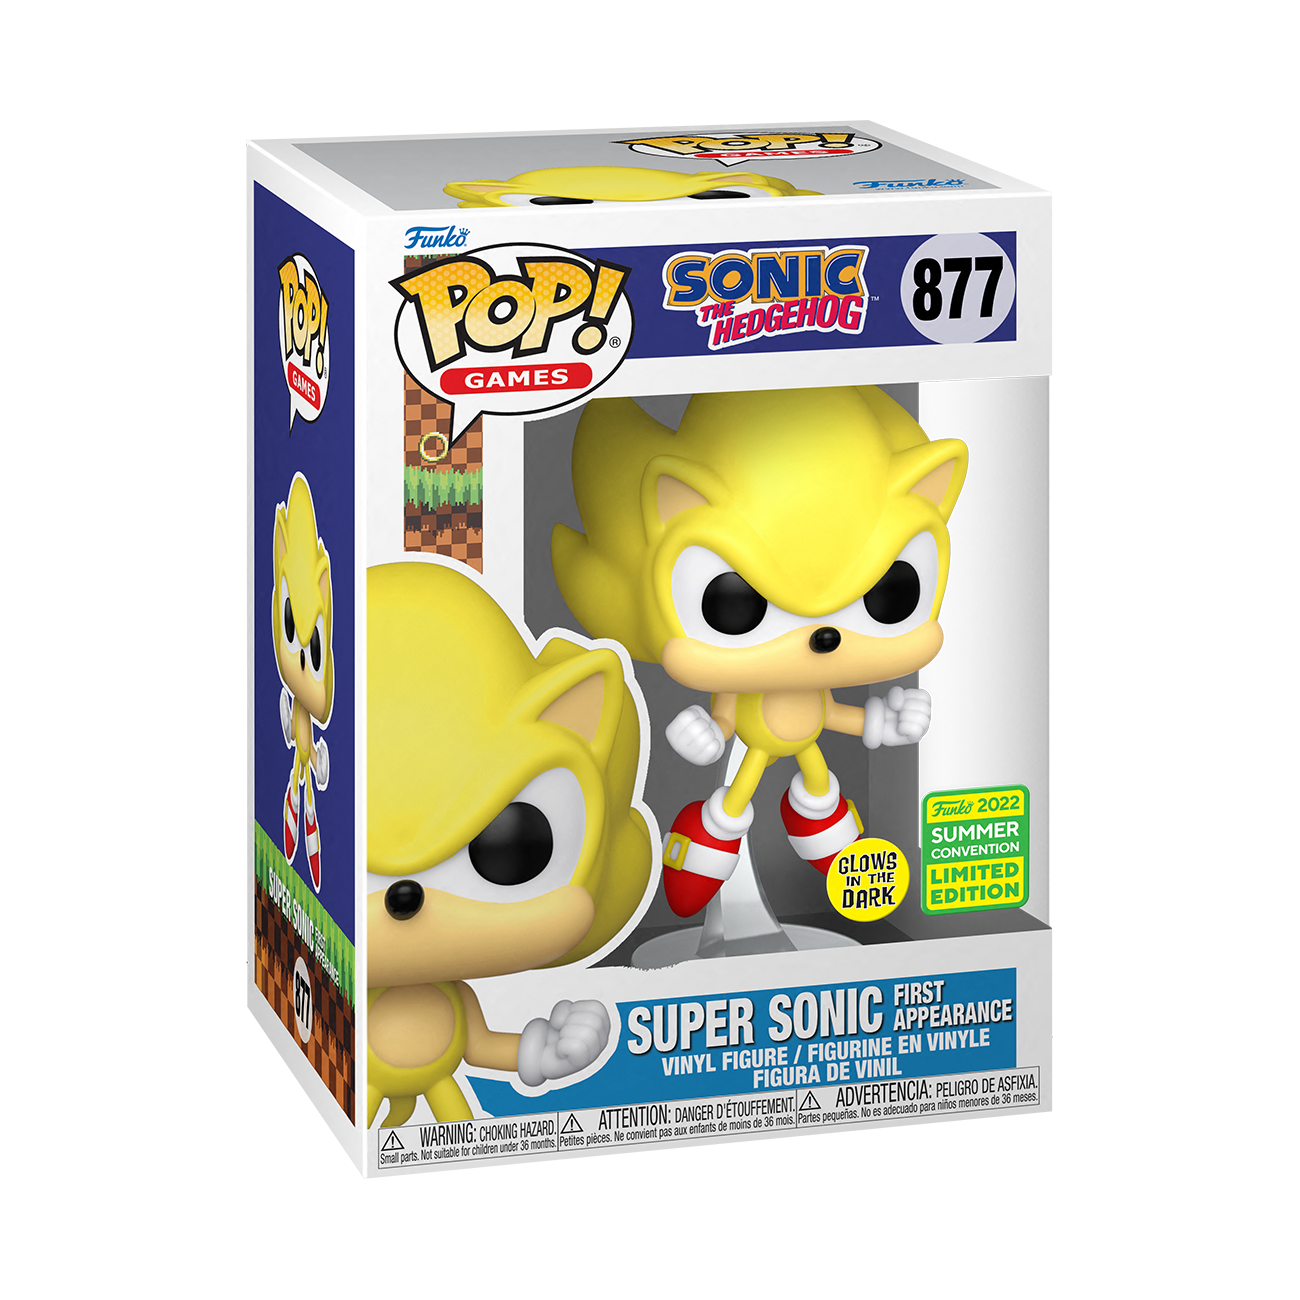 Funko Pop! Games: Sonic- Super Sonic First Appearance​ Vinyl Figure (2022 Summer Convention Limited Edition) - image 3 of 7